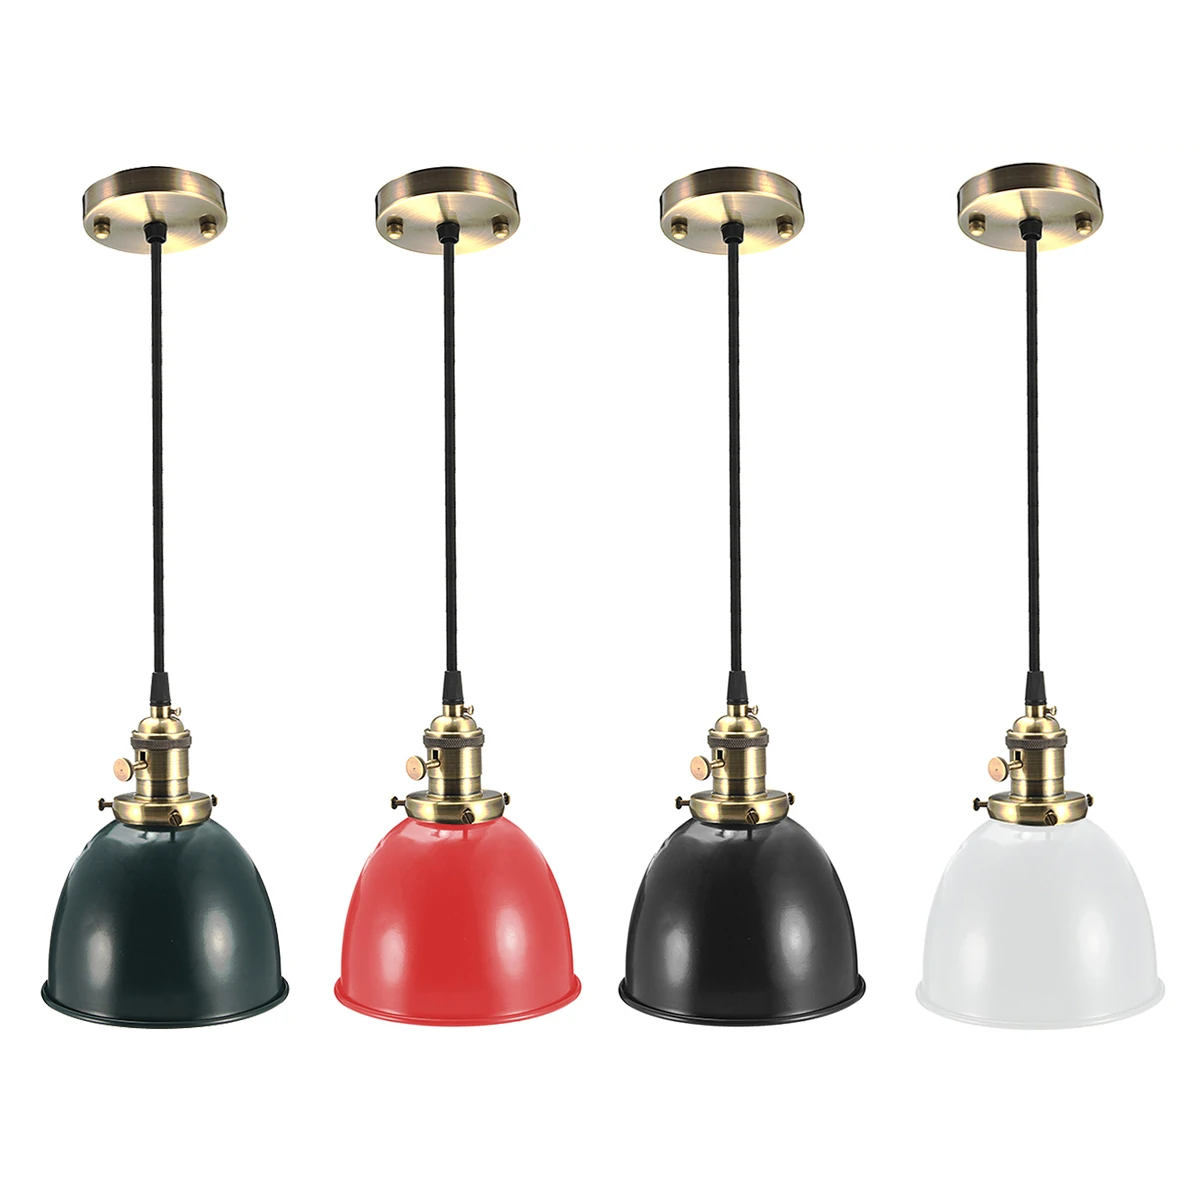 Find Elfeland Cafe Style Retro Ceiling Light Pendant Metal Shade Modern Rustic Industrial Vintage Look E27 Socket Height adjustable Lampshade for Loft Bar Cafe Light Ceiling Lamp Shade for Sale on Gipsybee.com